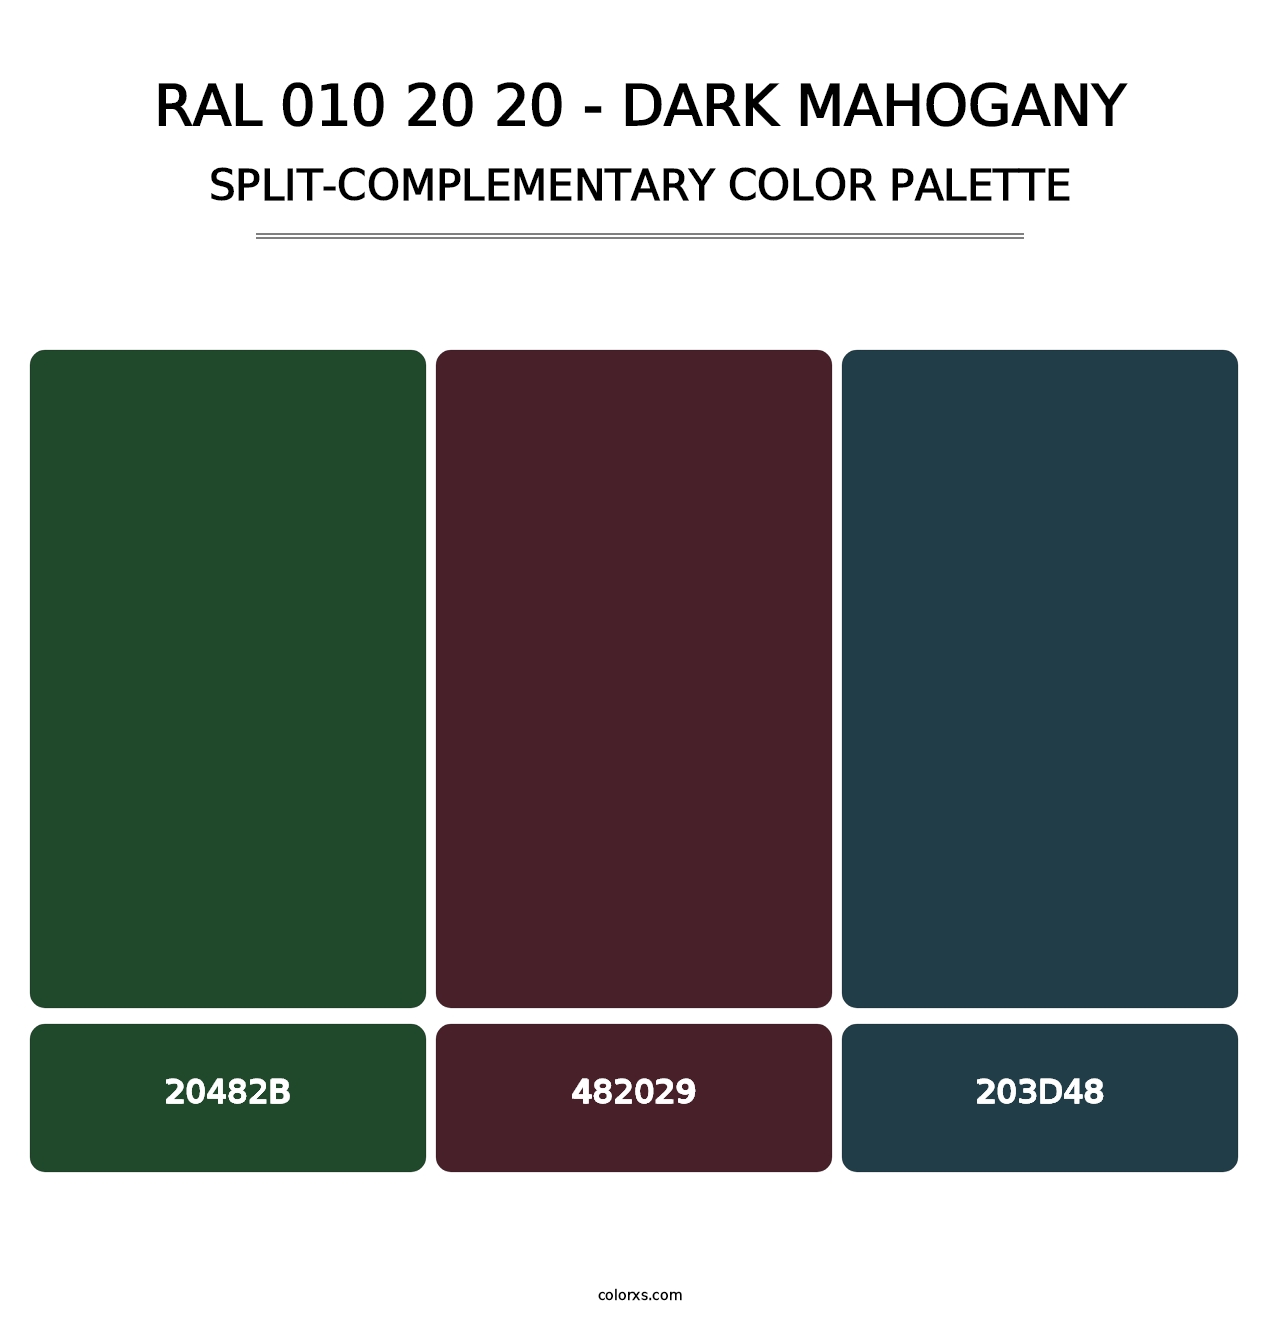 RAL 010 20 20 - Dark Mahogany - Split-Complementary Color Palette